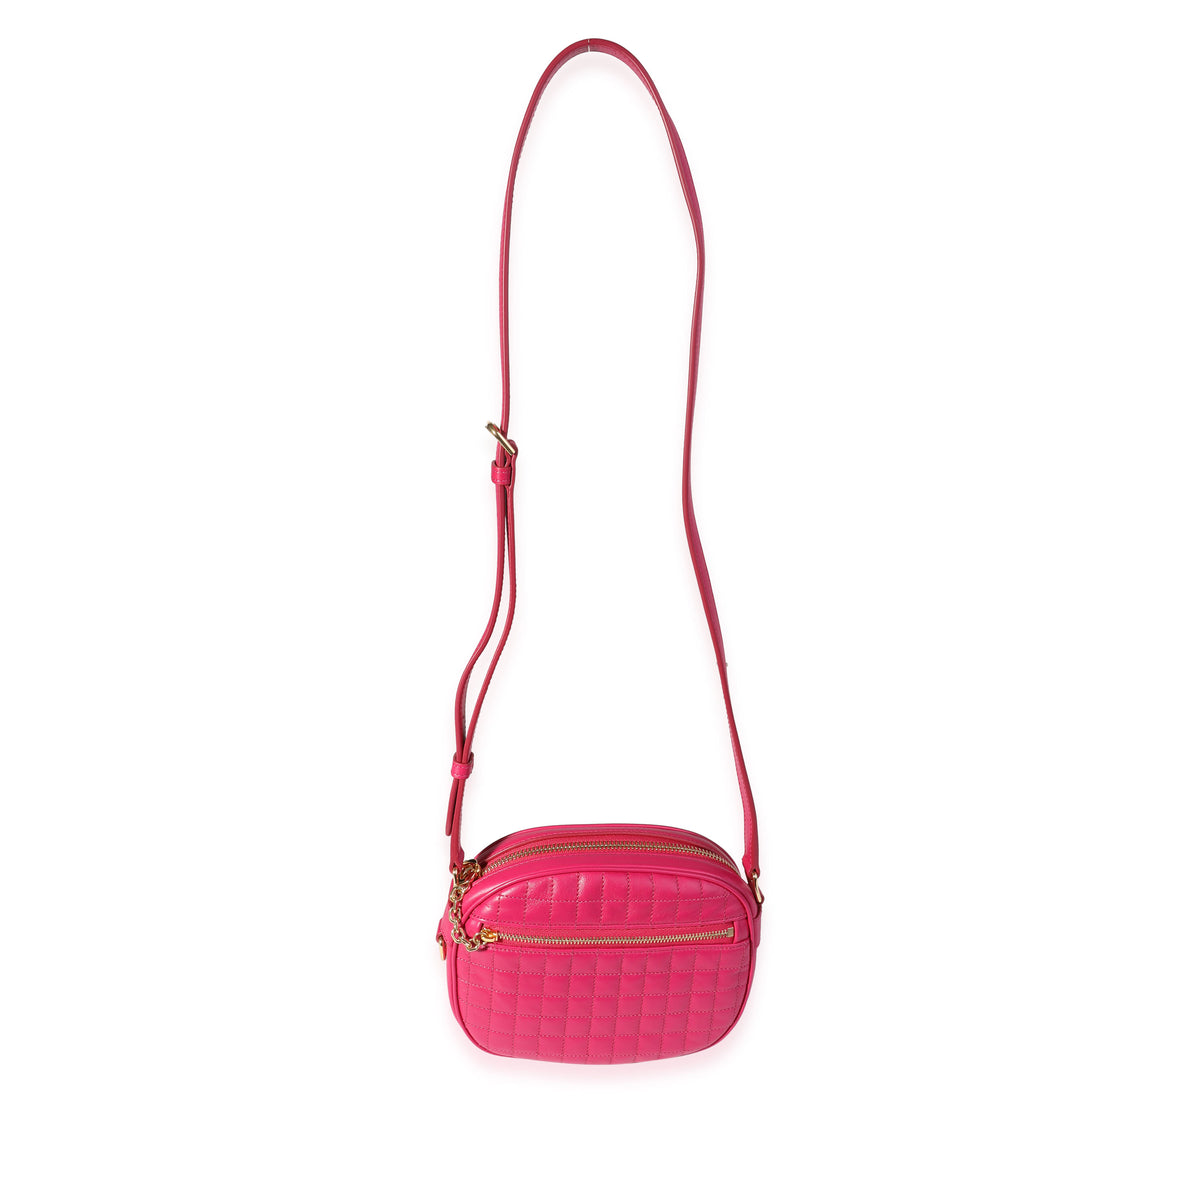 Celine Hot Pink Quilted Calfskin Small C Charm Camera Bag